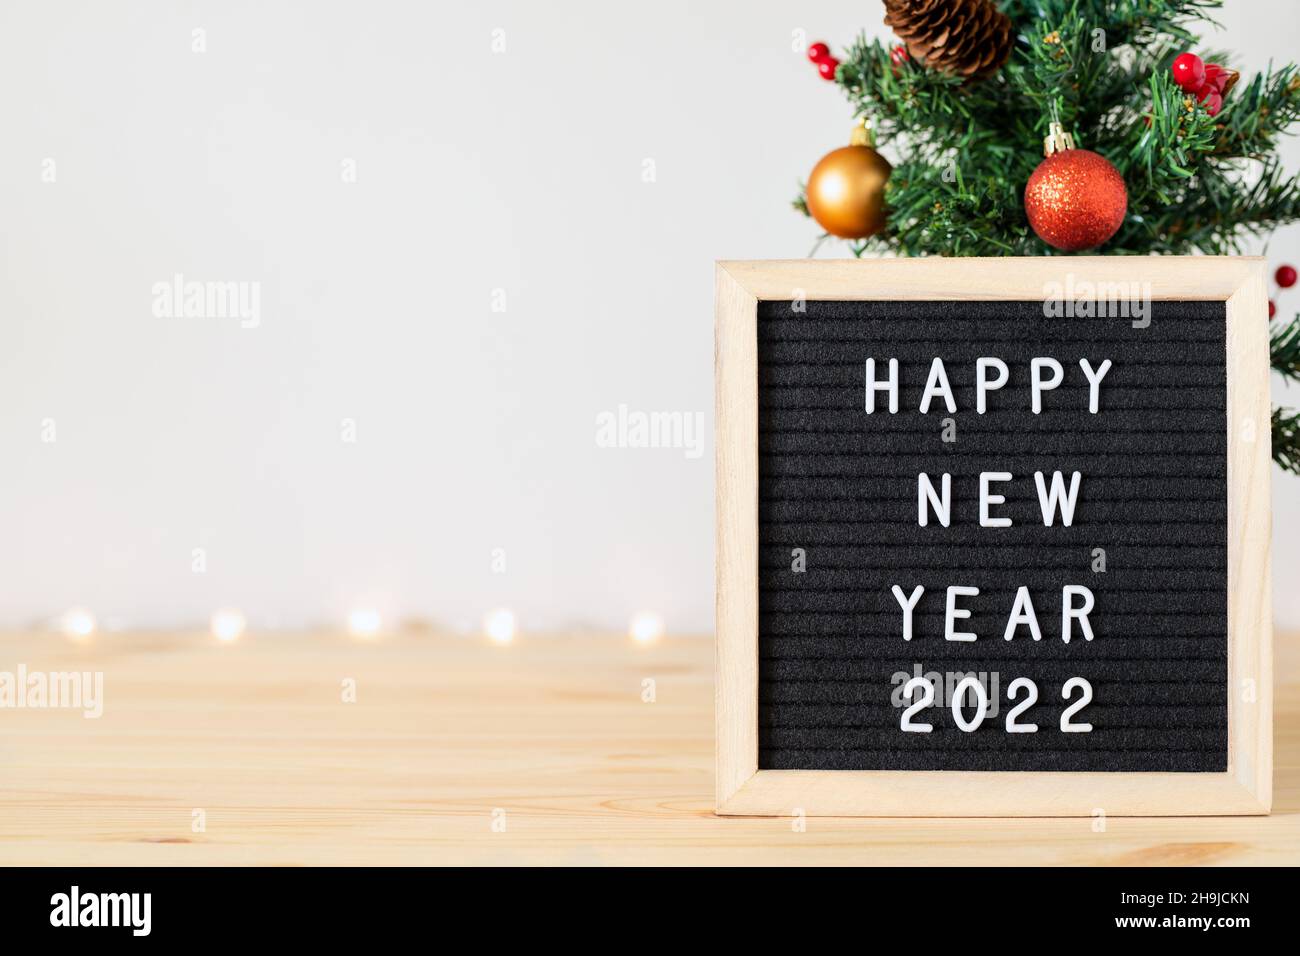 Happy new year 2022 text on felt letter board and Christmas tree with holiday decorations on table. Copy space on one side for text Stock Photo